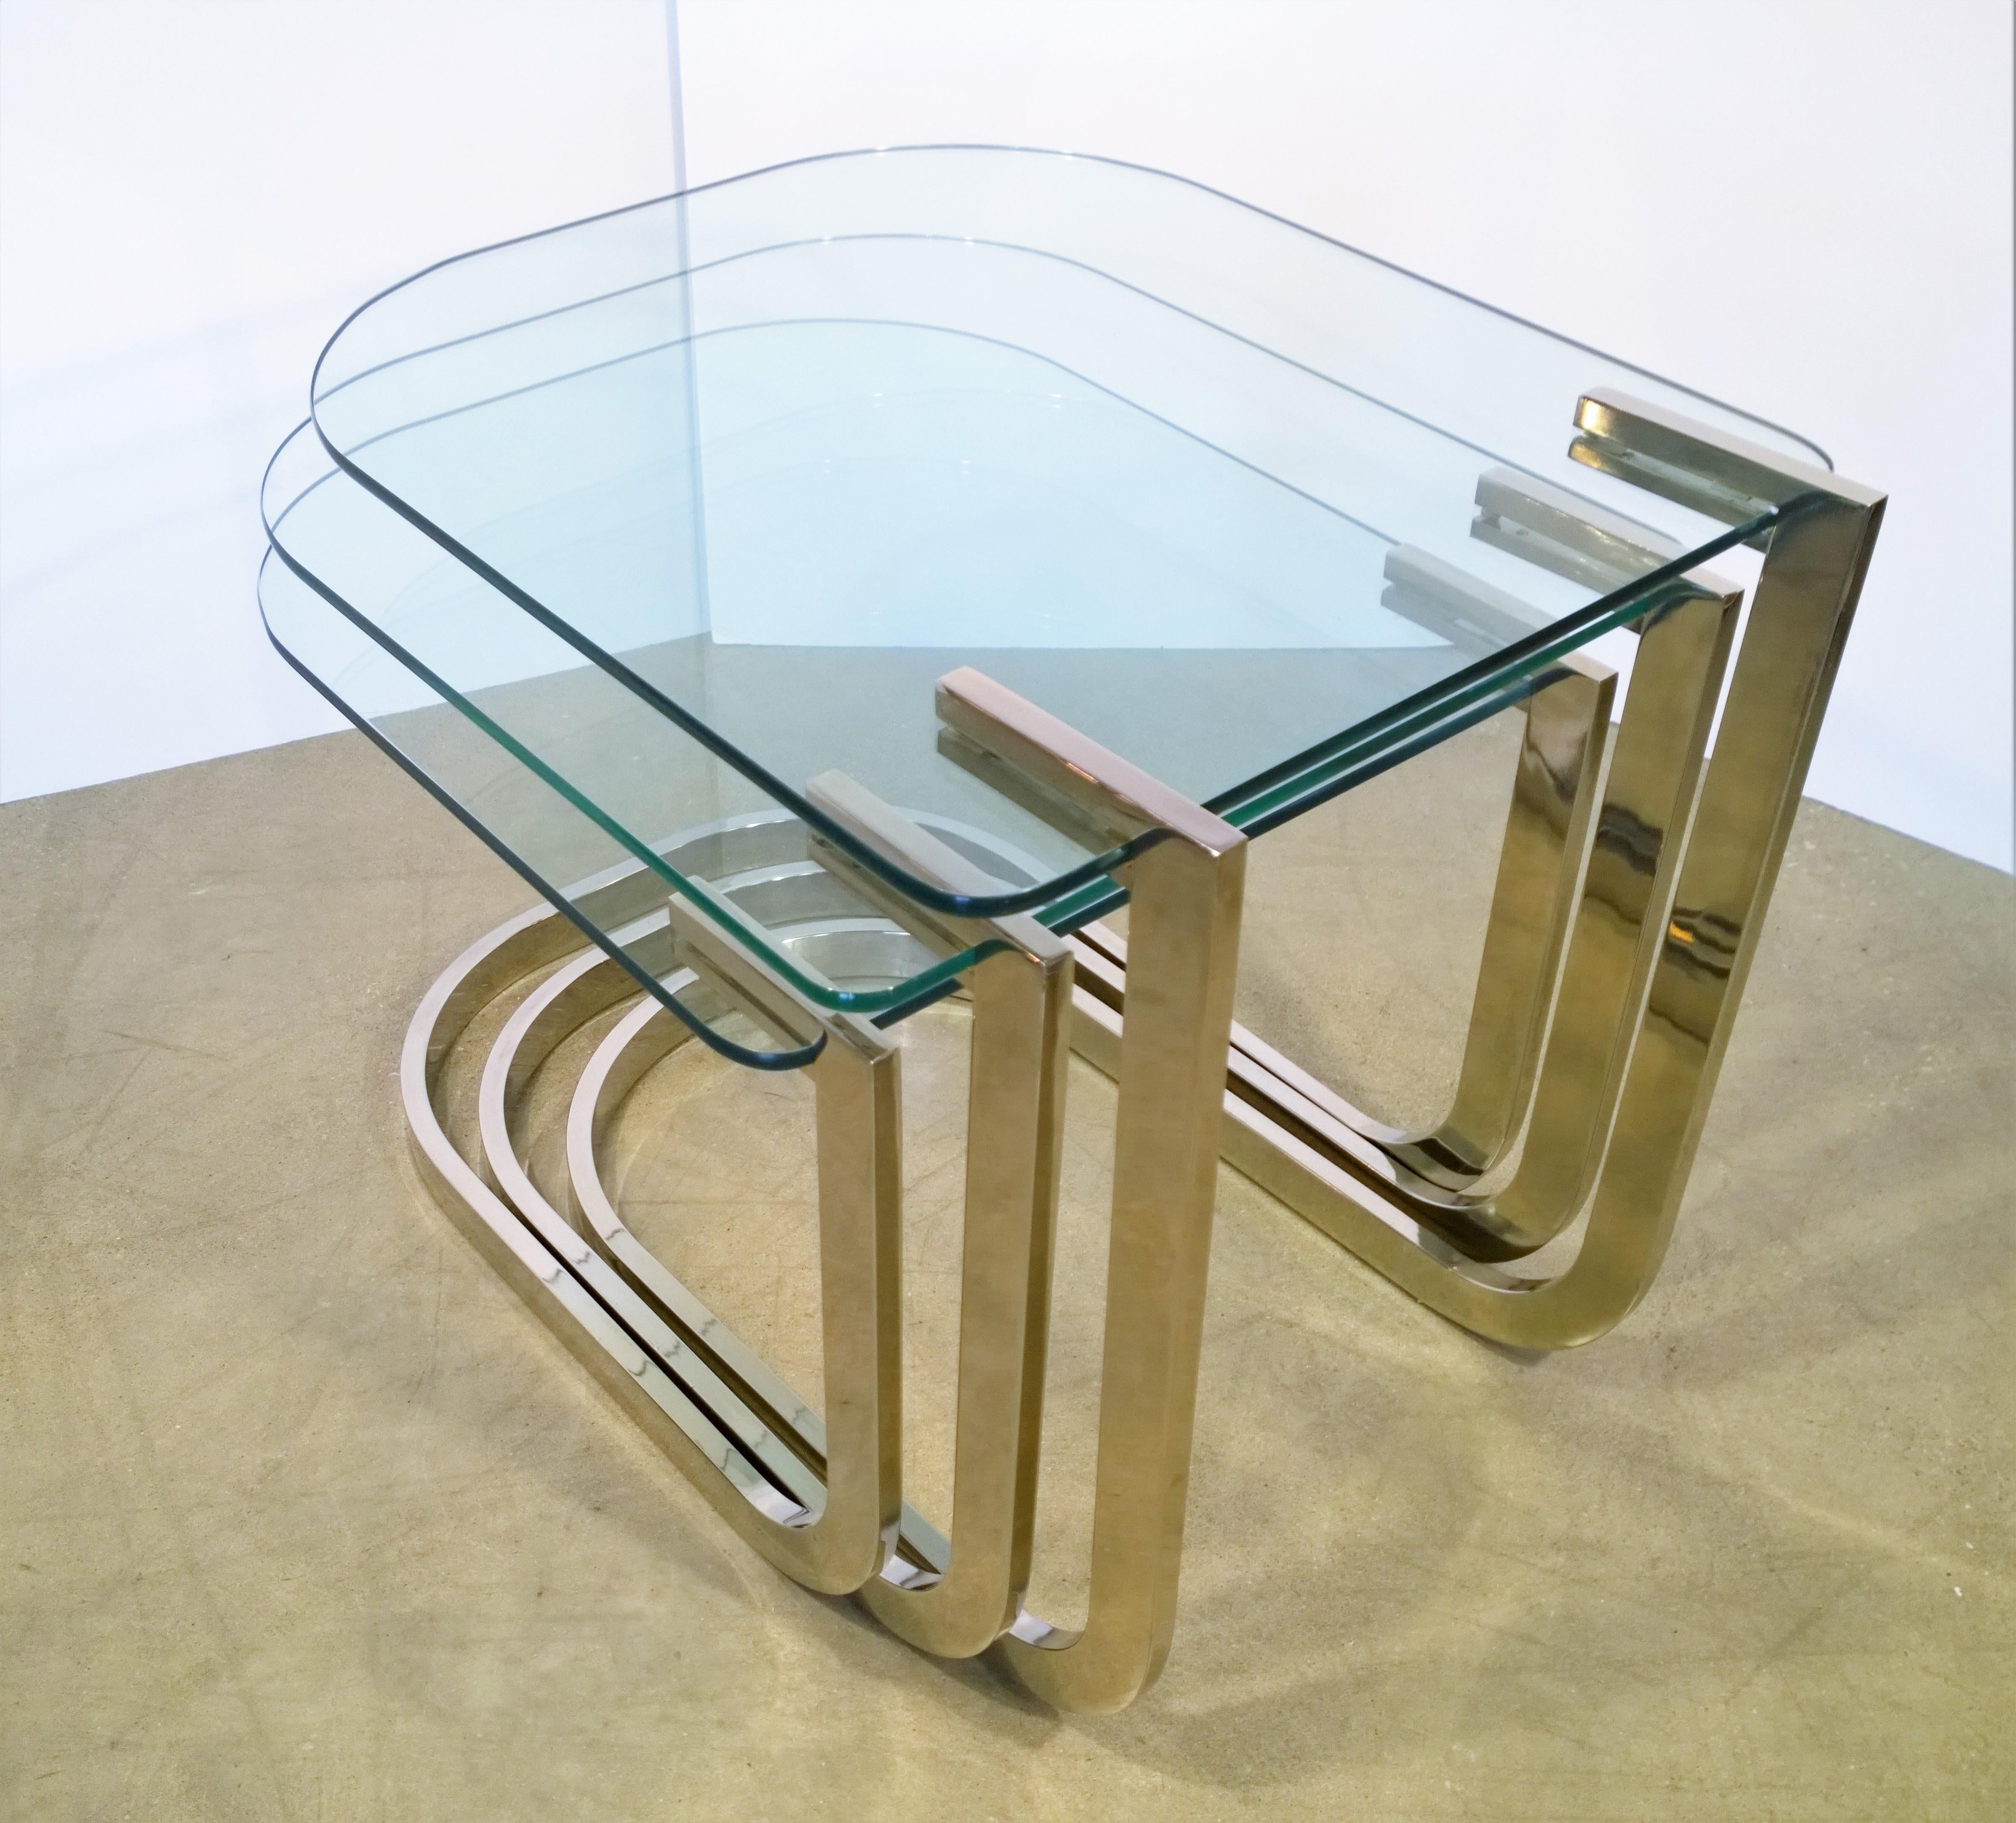 Set of 3 Design Institute America Horseshoe Shaped Chrome & Glass Nesting Tables In Good Condition For Sale In Houston, TX